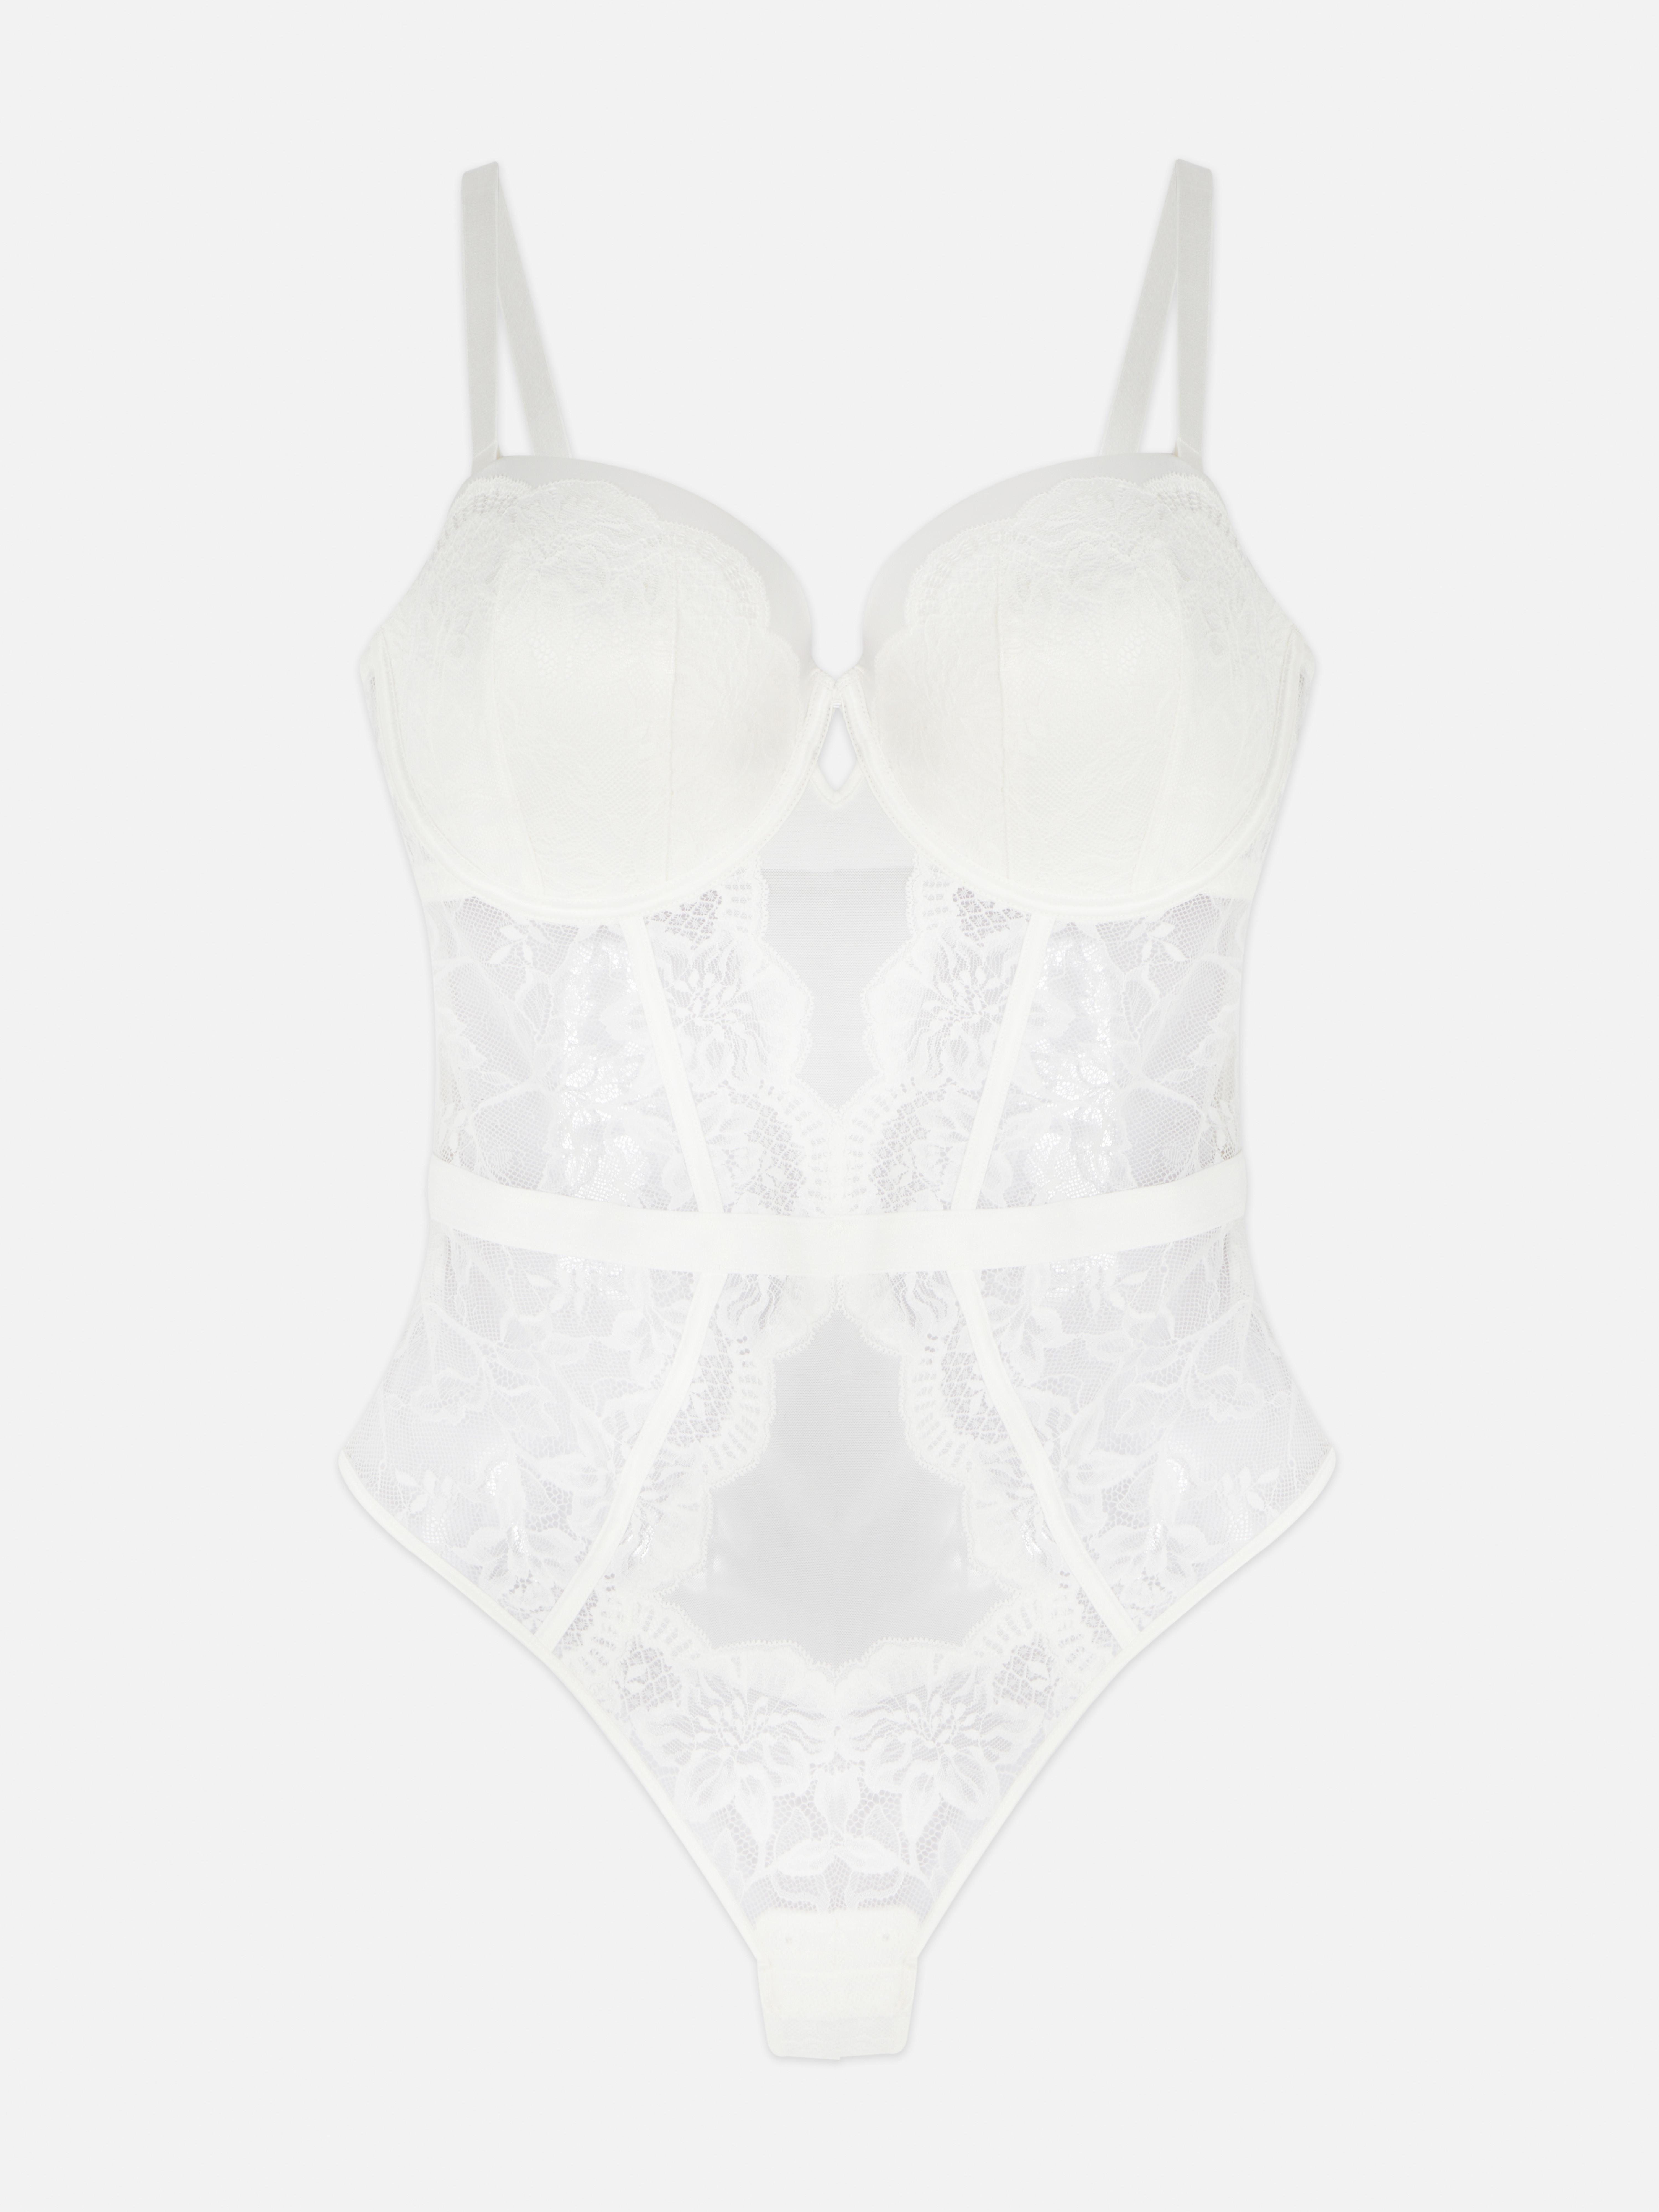 Primark seamless removable cups bra set. Available for immediate